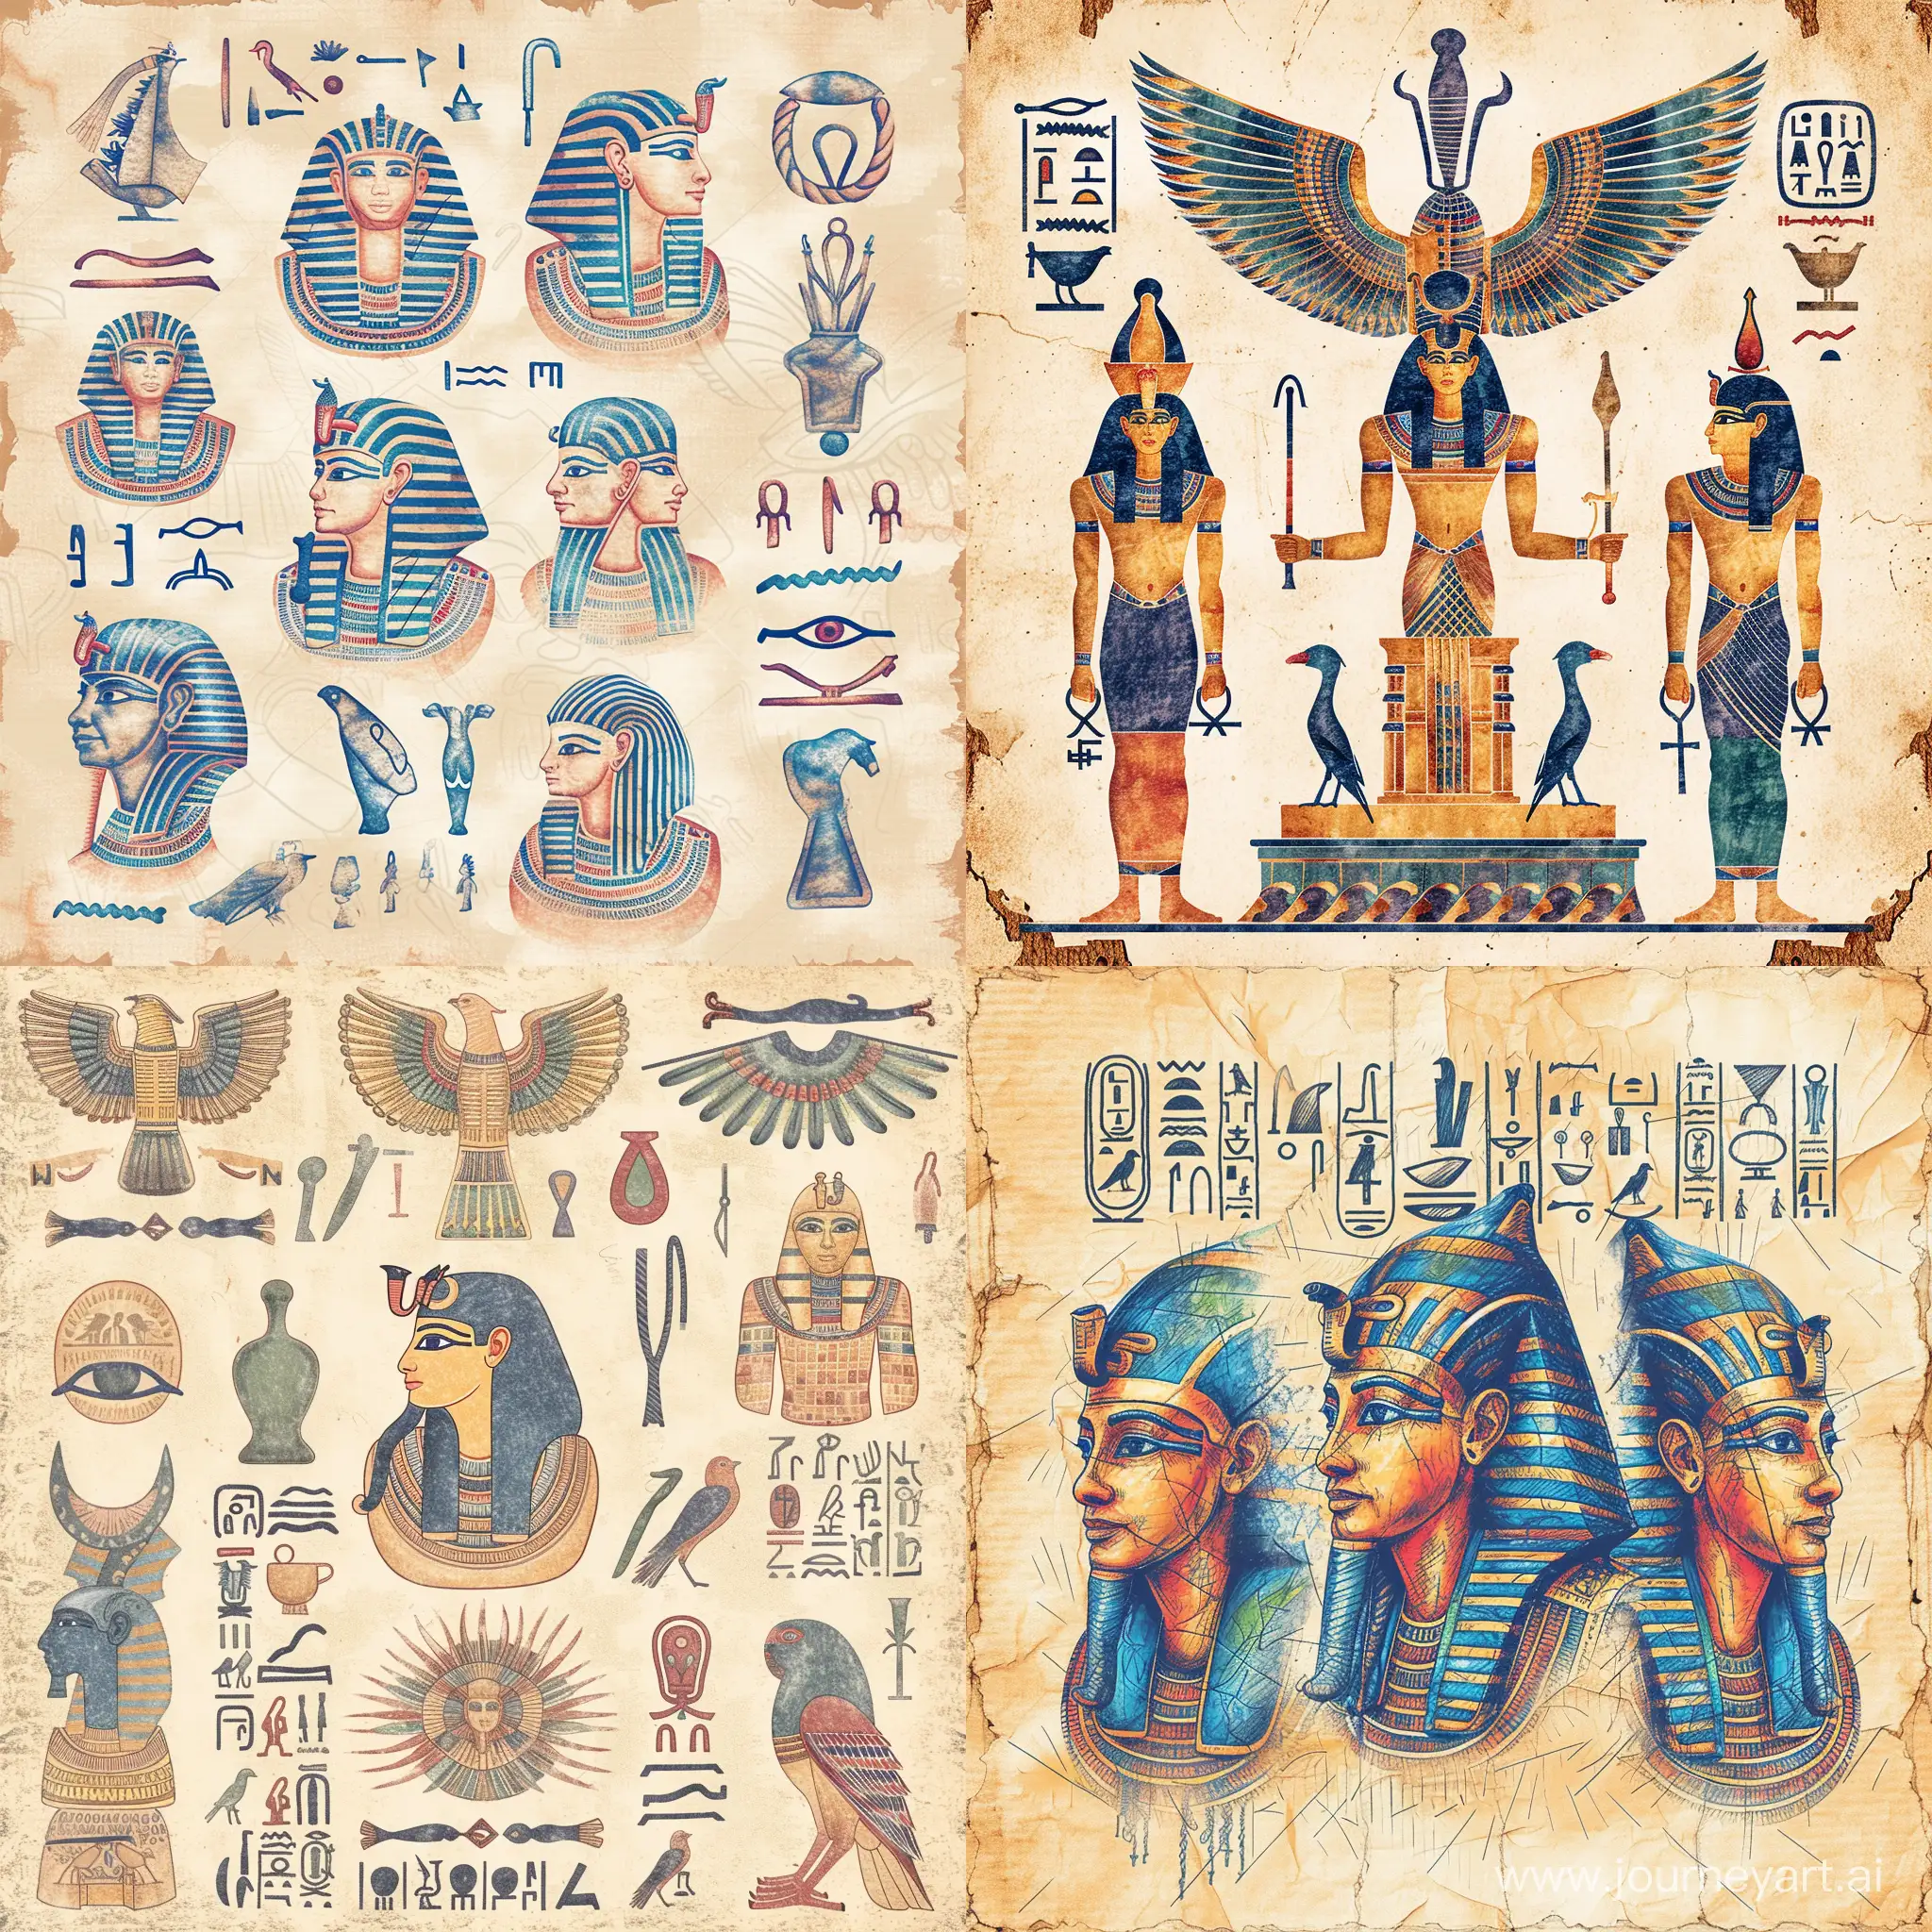 Ancient-Egyptian-Symbols-on-Antique-Paper-Delicate-Watercolor-Stylized-Caricature